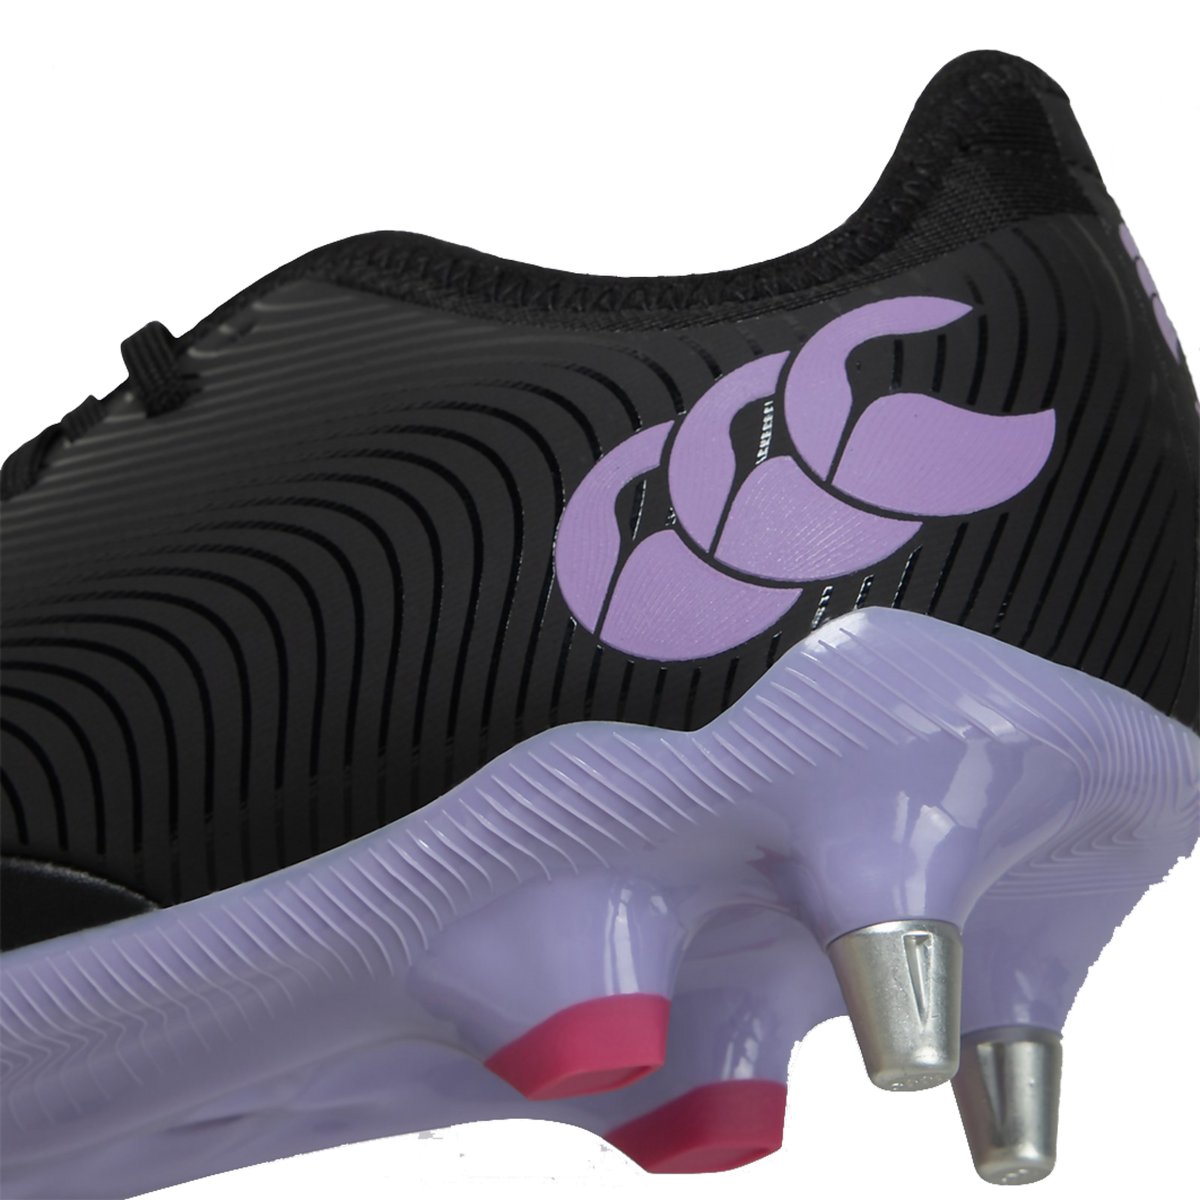 Canterbury Phoenix Genesis Pro SG Boots a High-Performance Quality CCC Rugby Shoe in Black/Purple Available in Unisex sizing 6-16